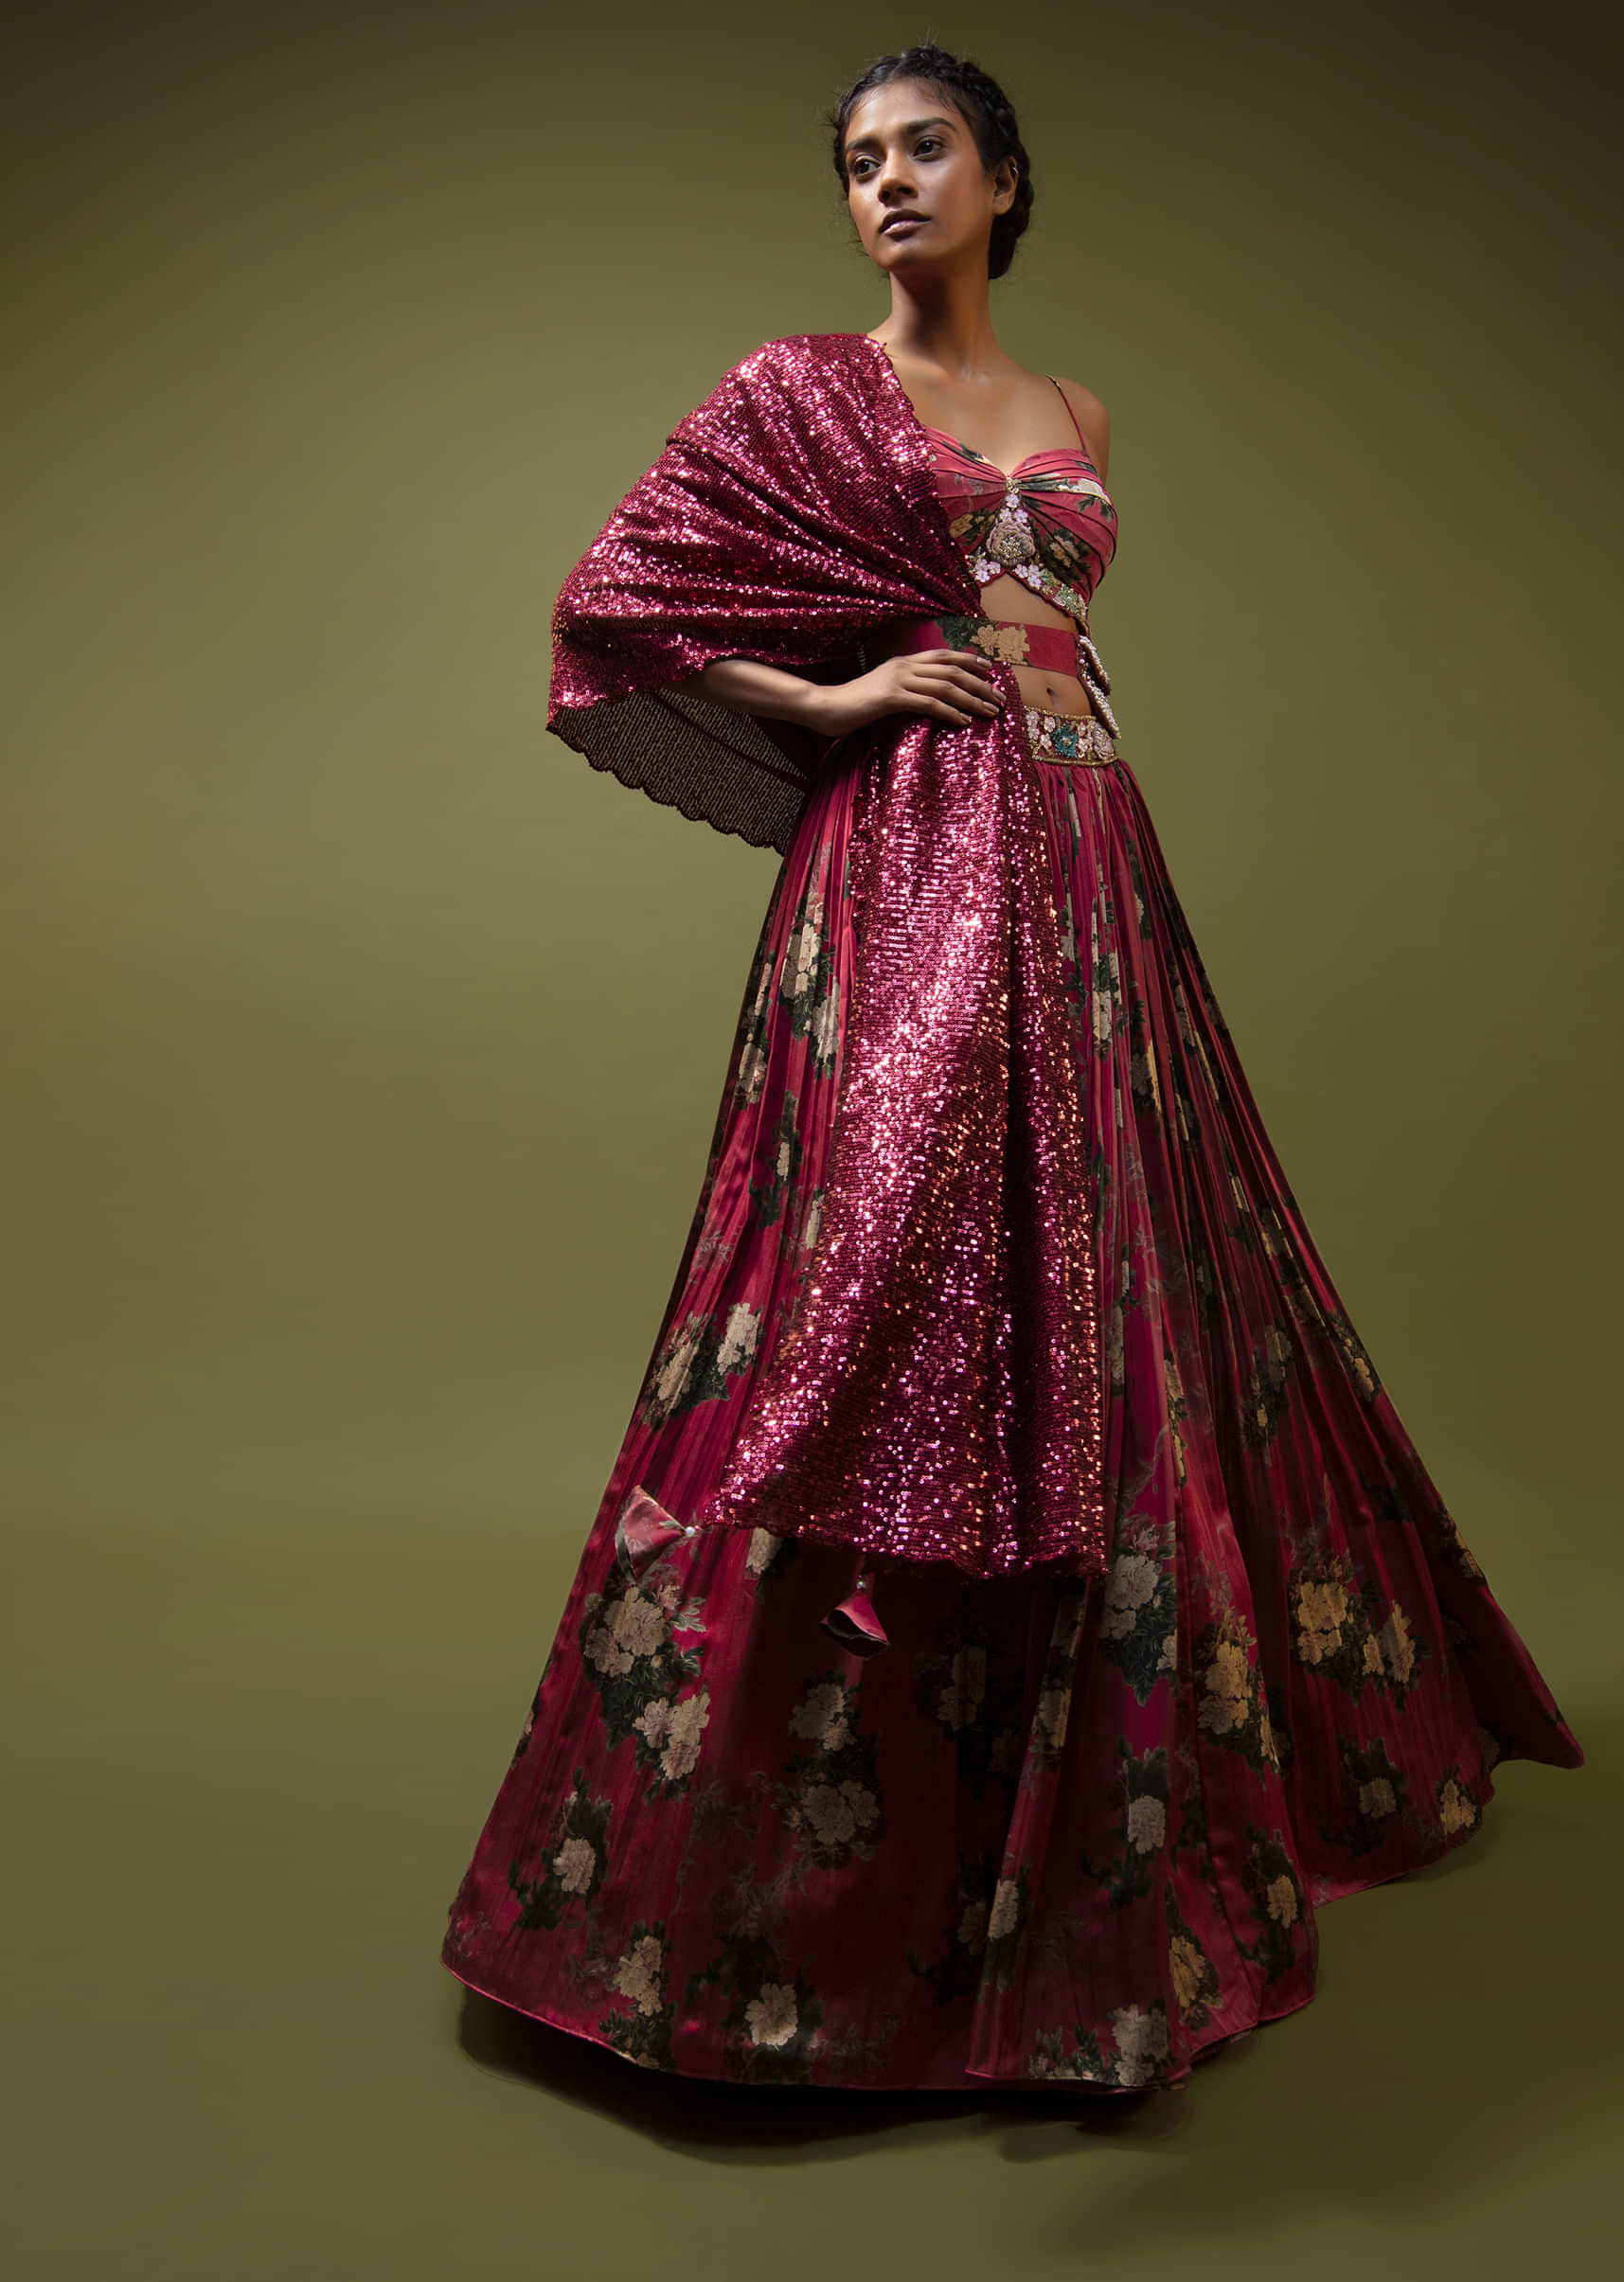 Cranberry Red Lehenga Choli In Floral Printed Satin With A Sequins Dupatta And Embroidered Belt Bag 